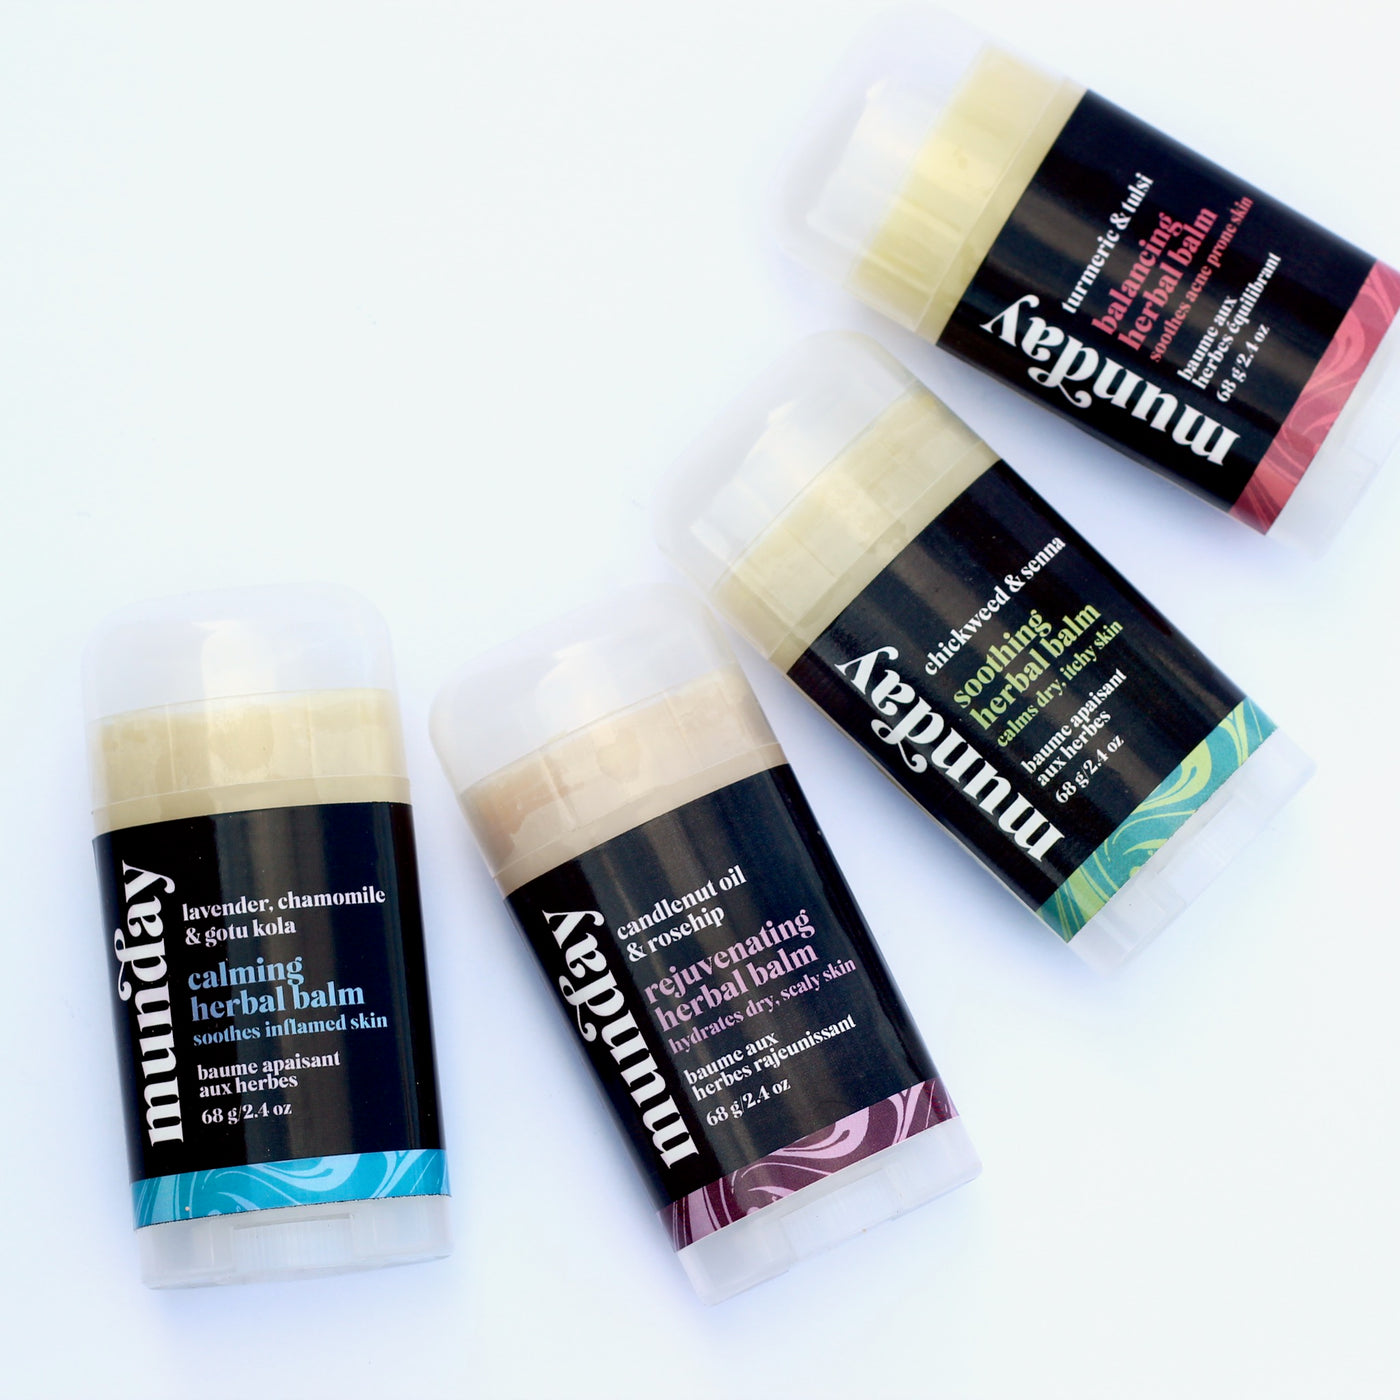 Herbal balms infused with nourishing plant extracts